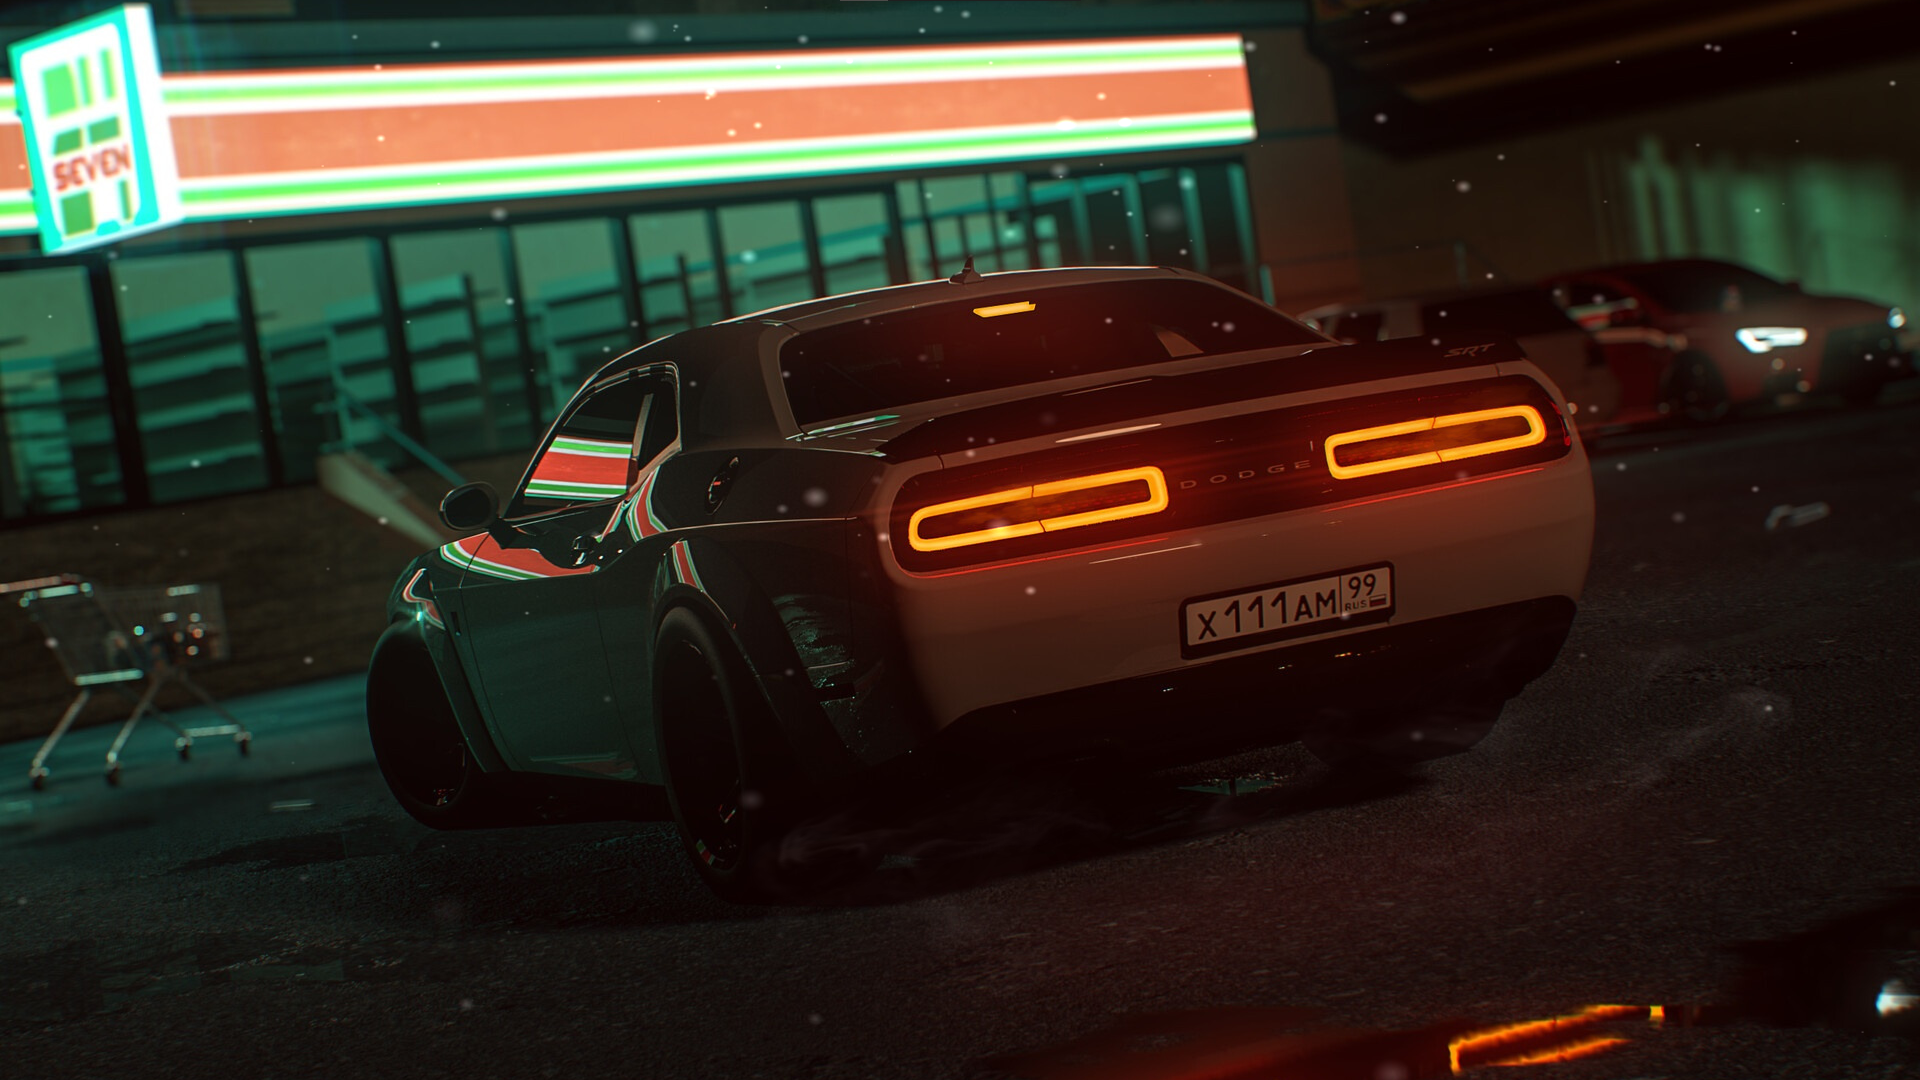 Car Convenience Store Parking Lot Night Dodge Outdoors 1920x1080